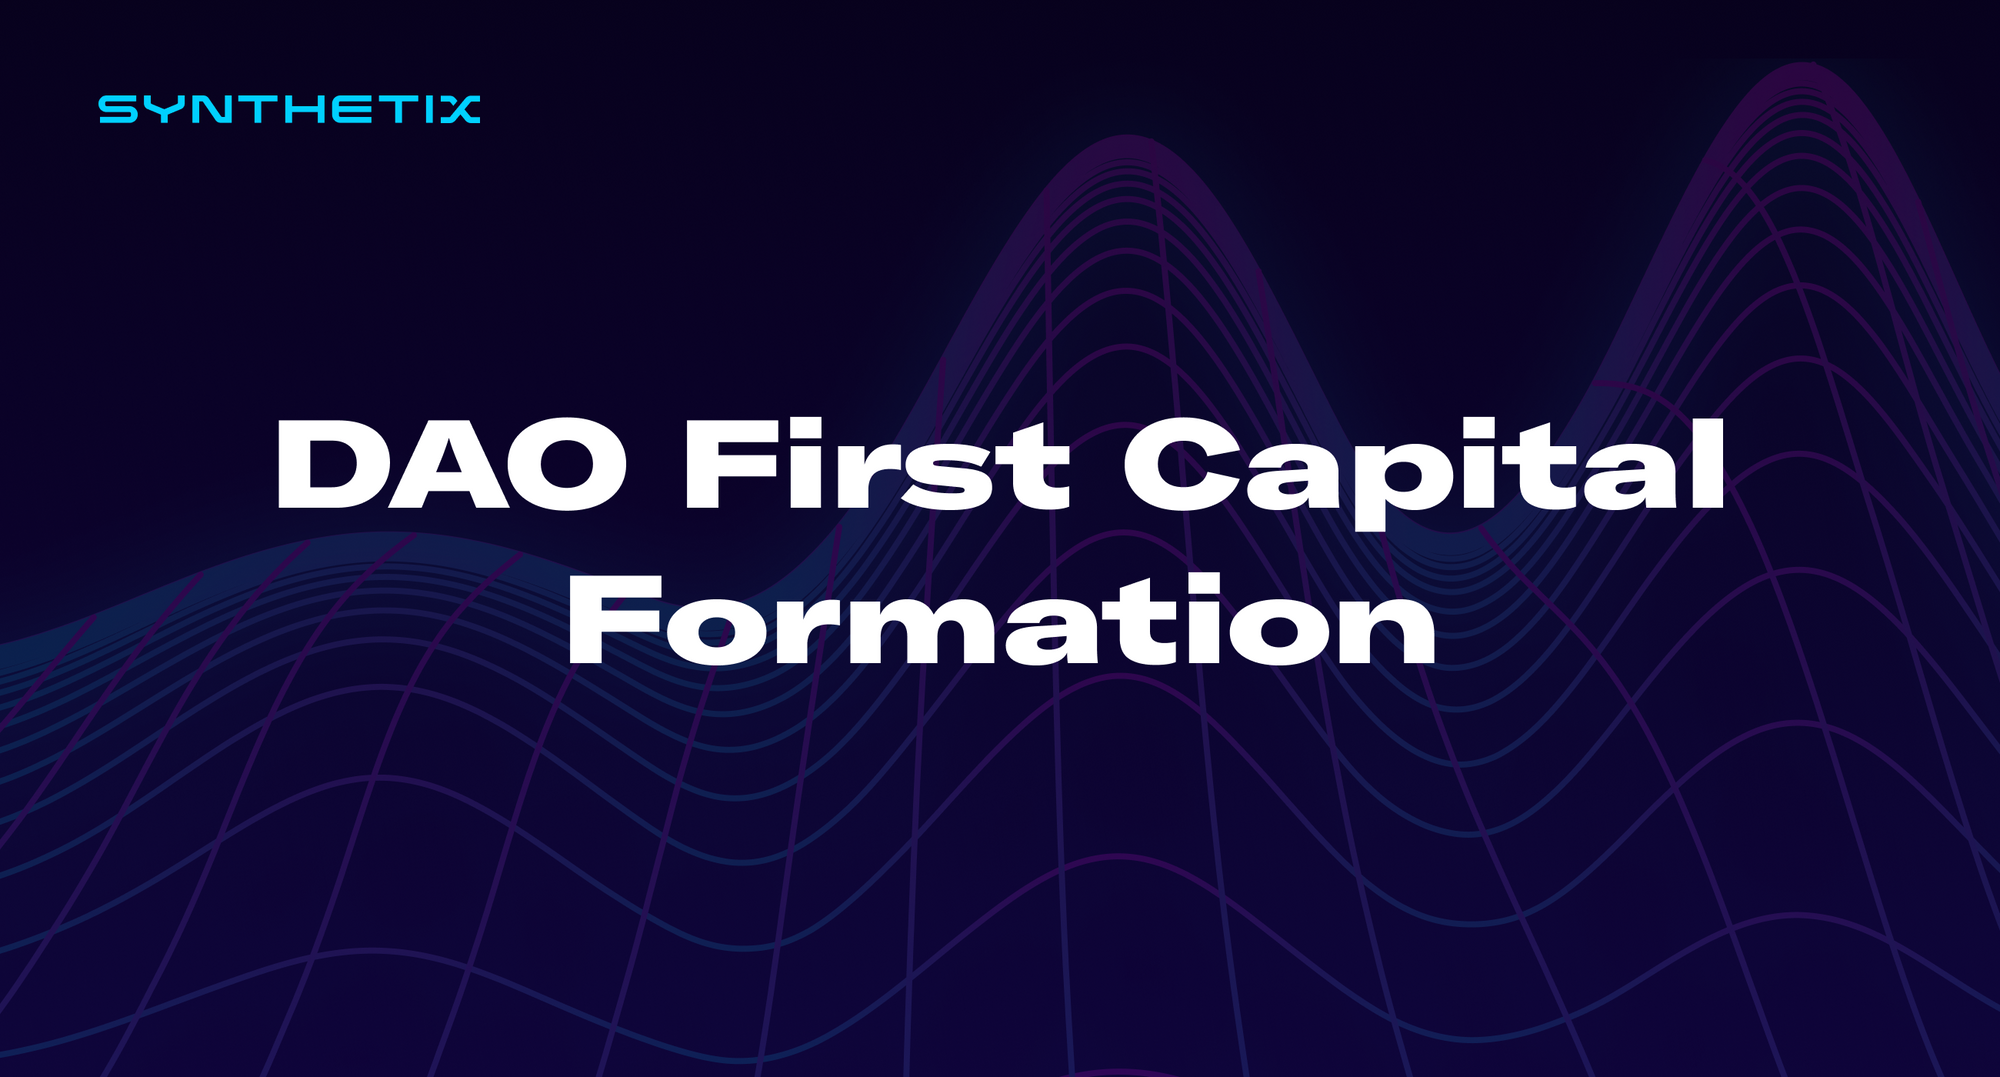 DAO First Capital Formation